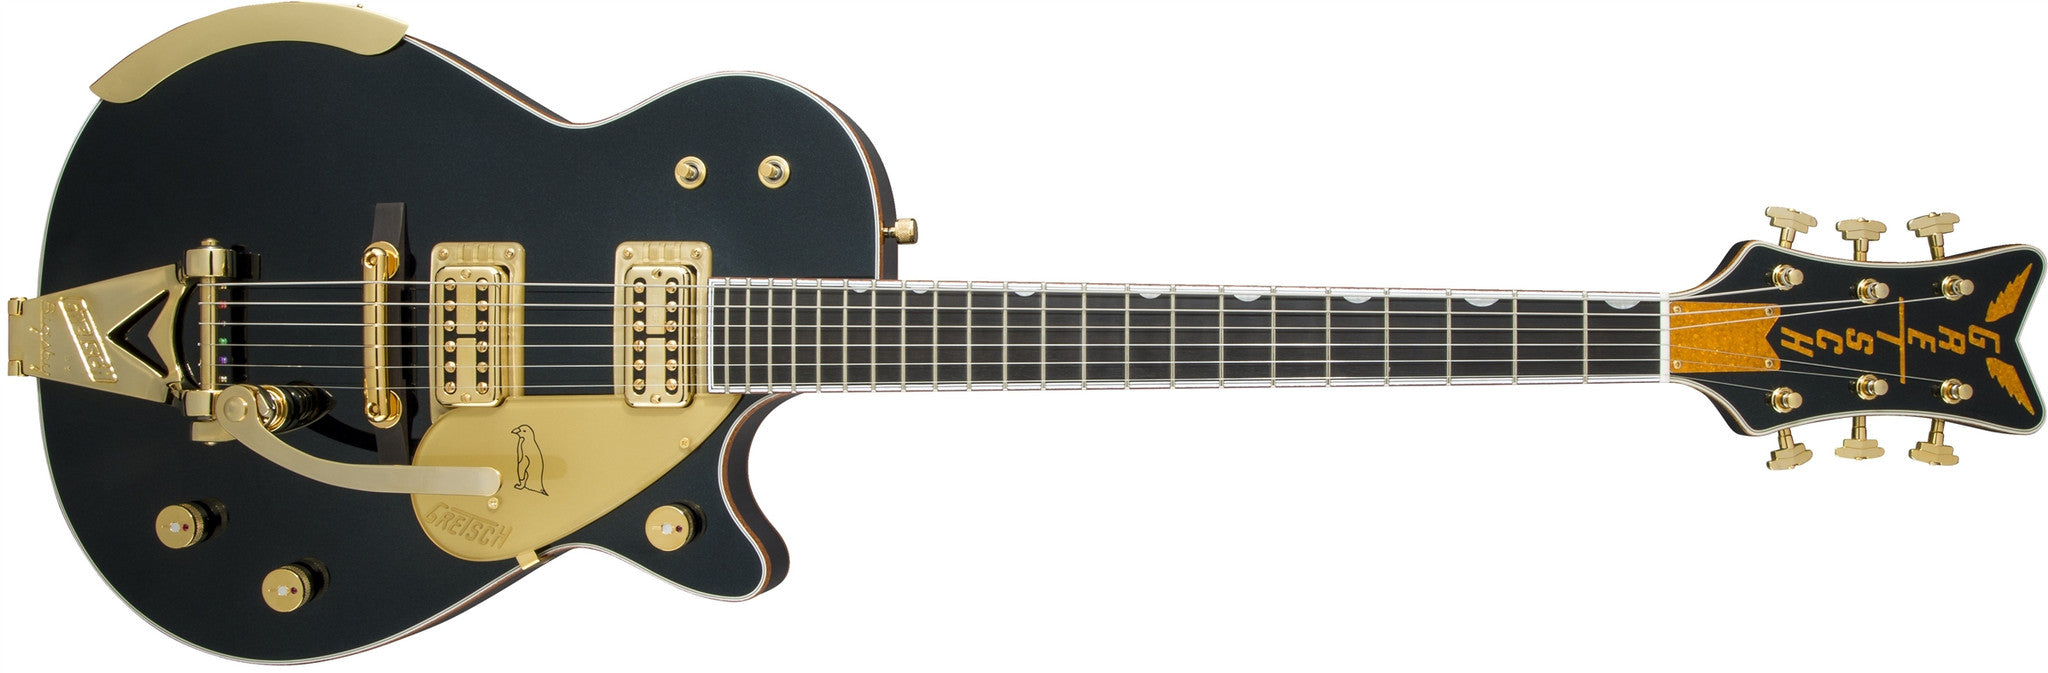 Gretsch G6134T-LTD15 Limited Edition Penguin, Ebony Fingerboard, Midnight Sapphire, with Case 2400509833 - L.A. Music - Canada's Favourite Music Store!